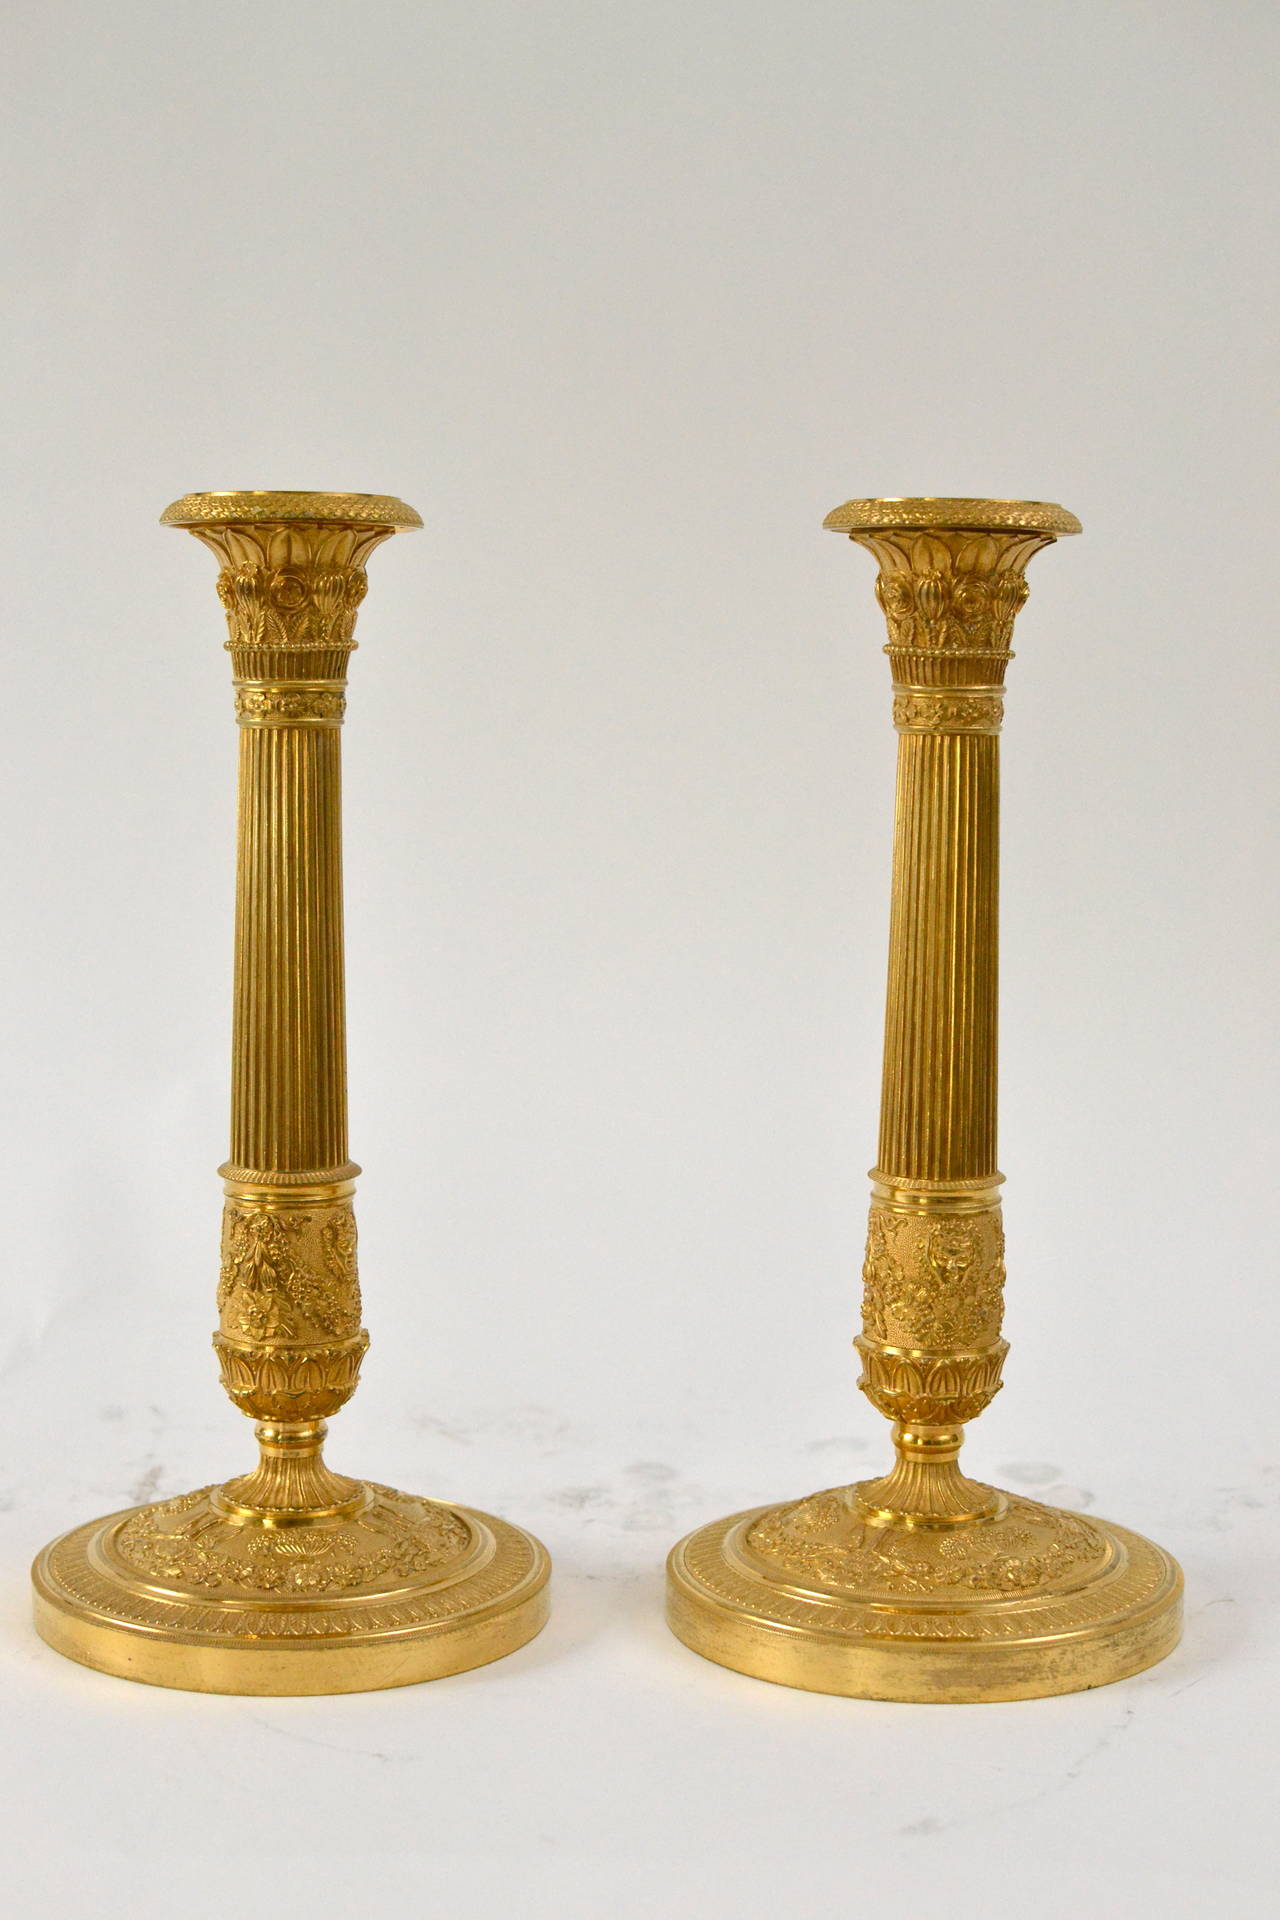 A pair of French Empire gilt bronze candlesticks, early 19th century.